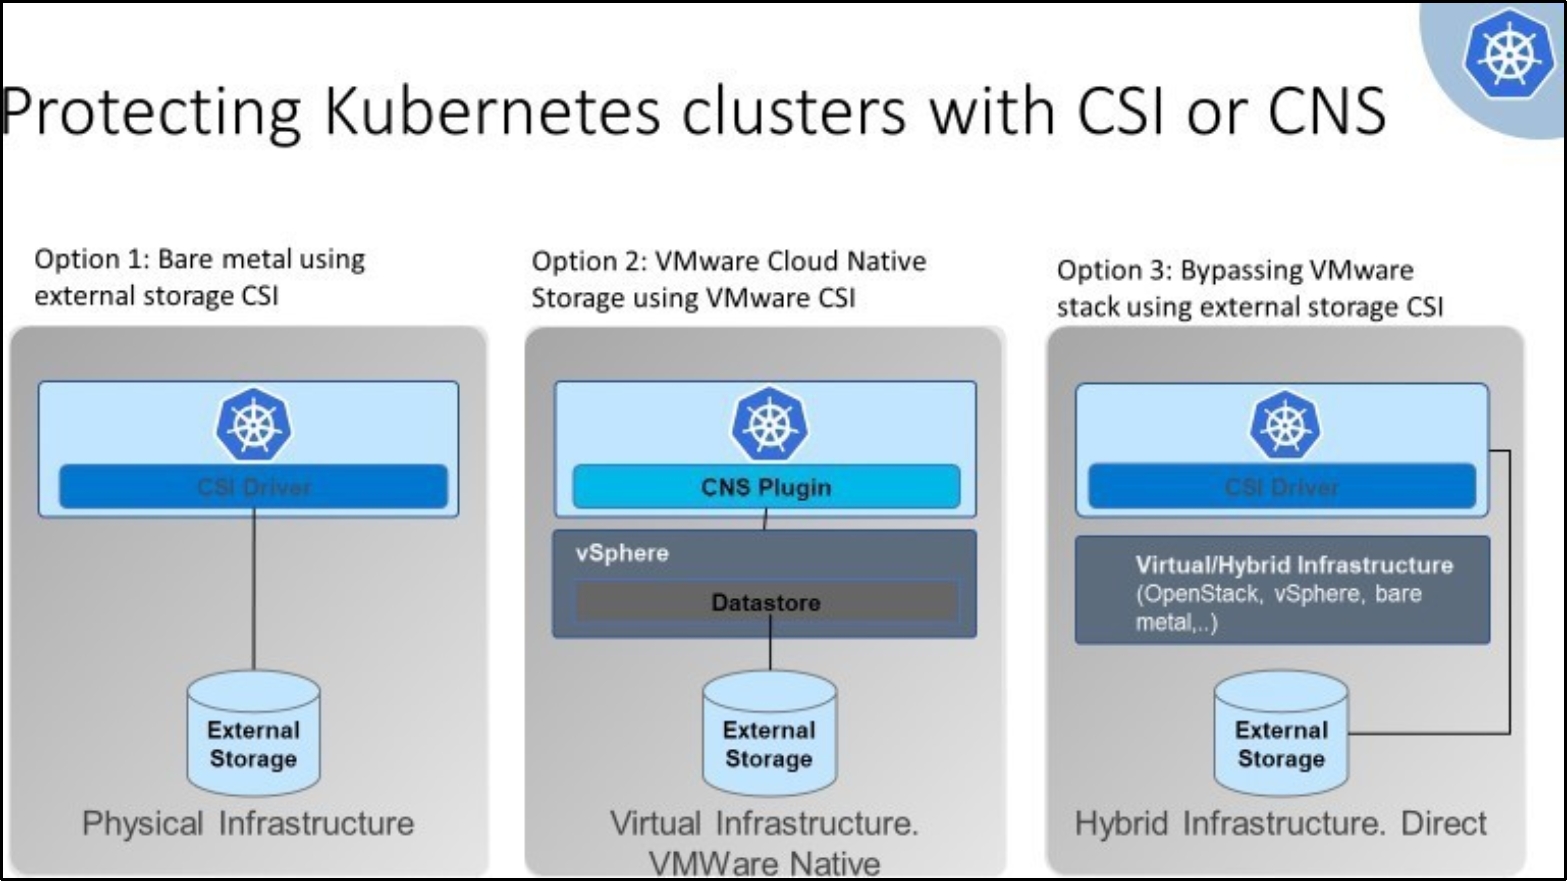 This image shows the protection of  Kubernetes cluster with CSI or CNS